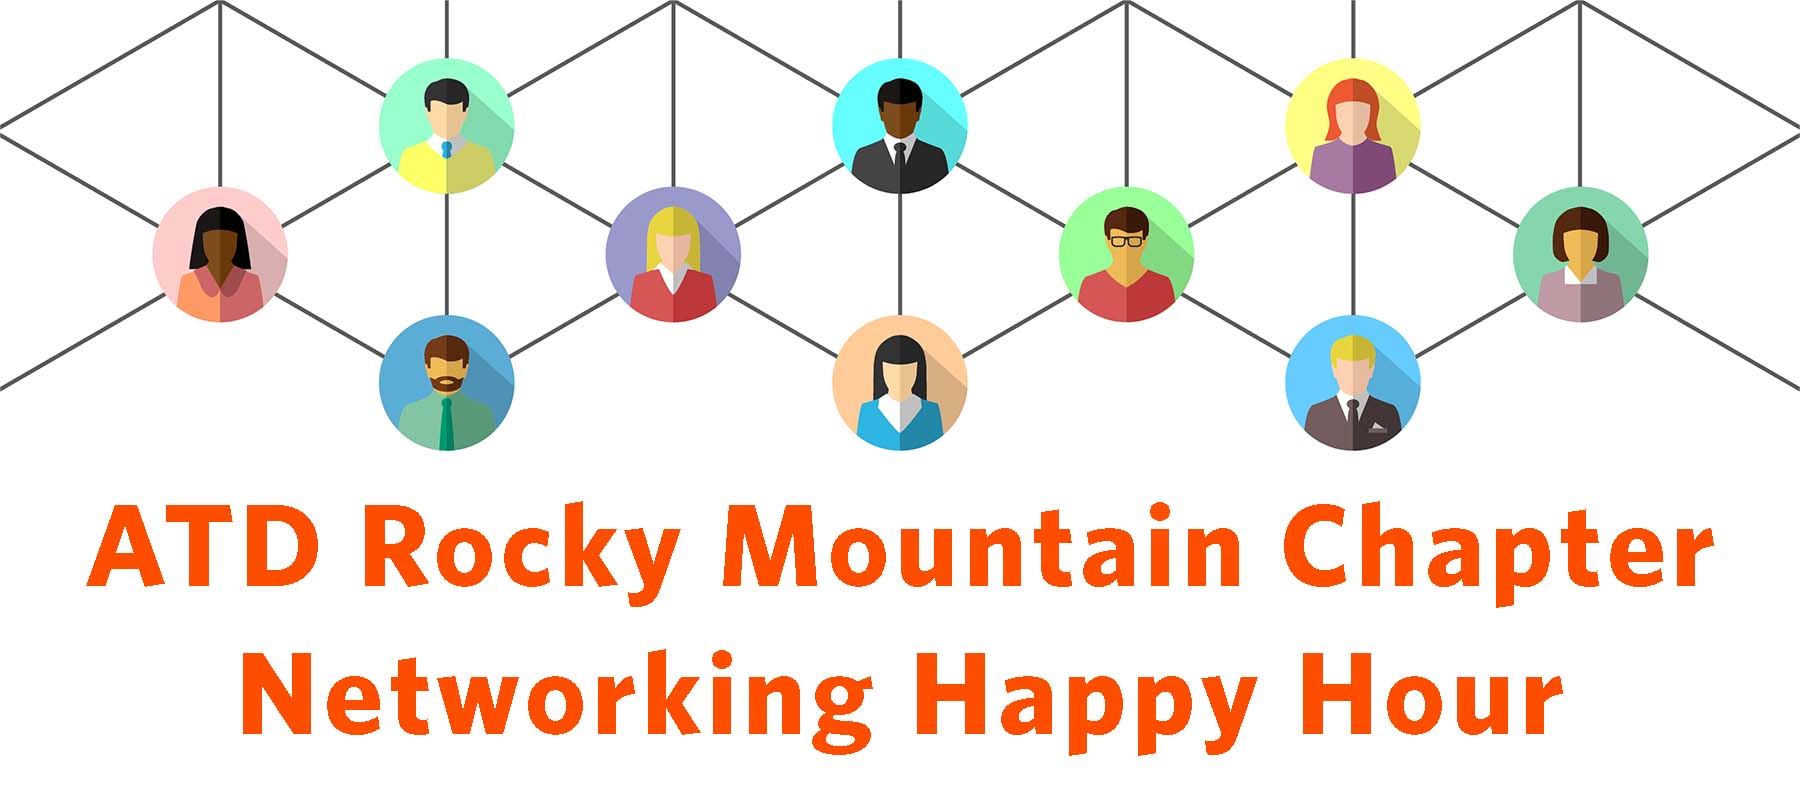 ATD Rocky Mountain Chapter Networking Happy Hour